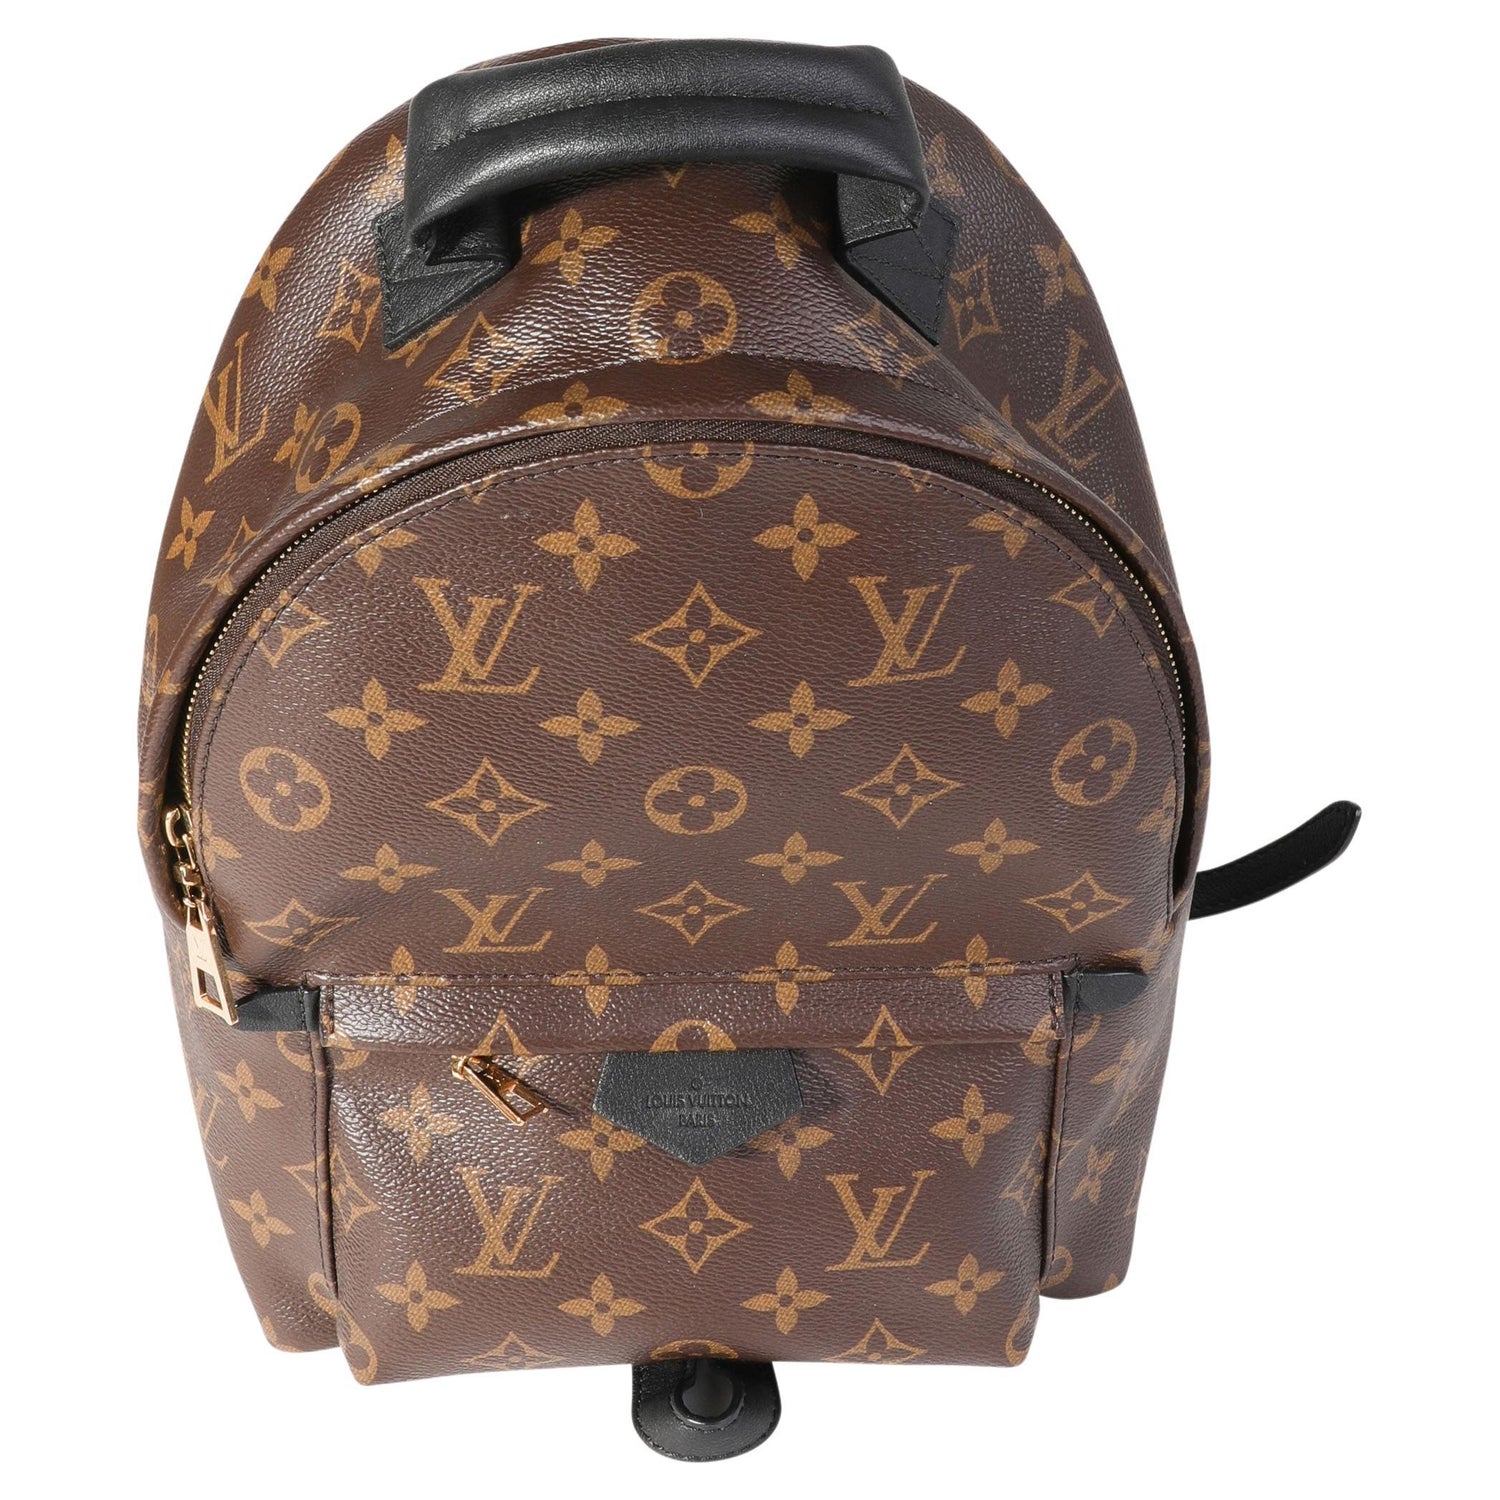 Louis Vuitton Backpack Gold Plate - For Sale on 1stDibs  louis vuitton  backpack with gold plate on front, gold plate louis vuitton inventpdr  backpack, real louis vuitton backpack gold plate